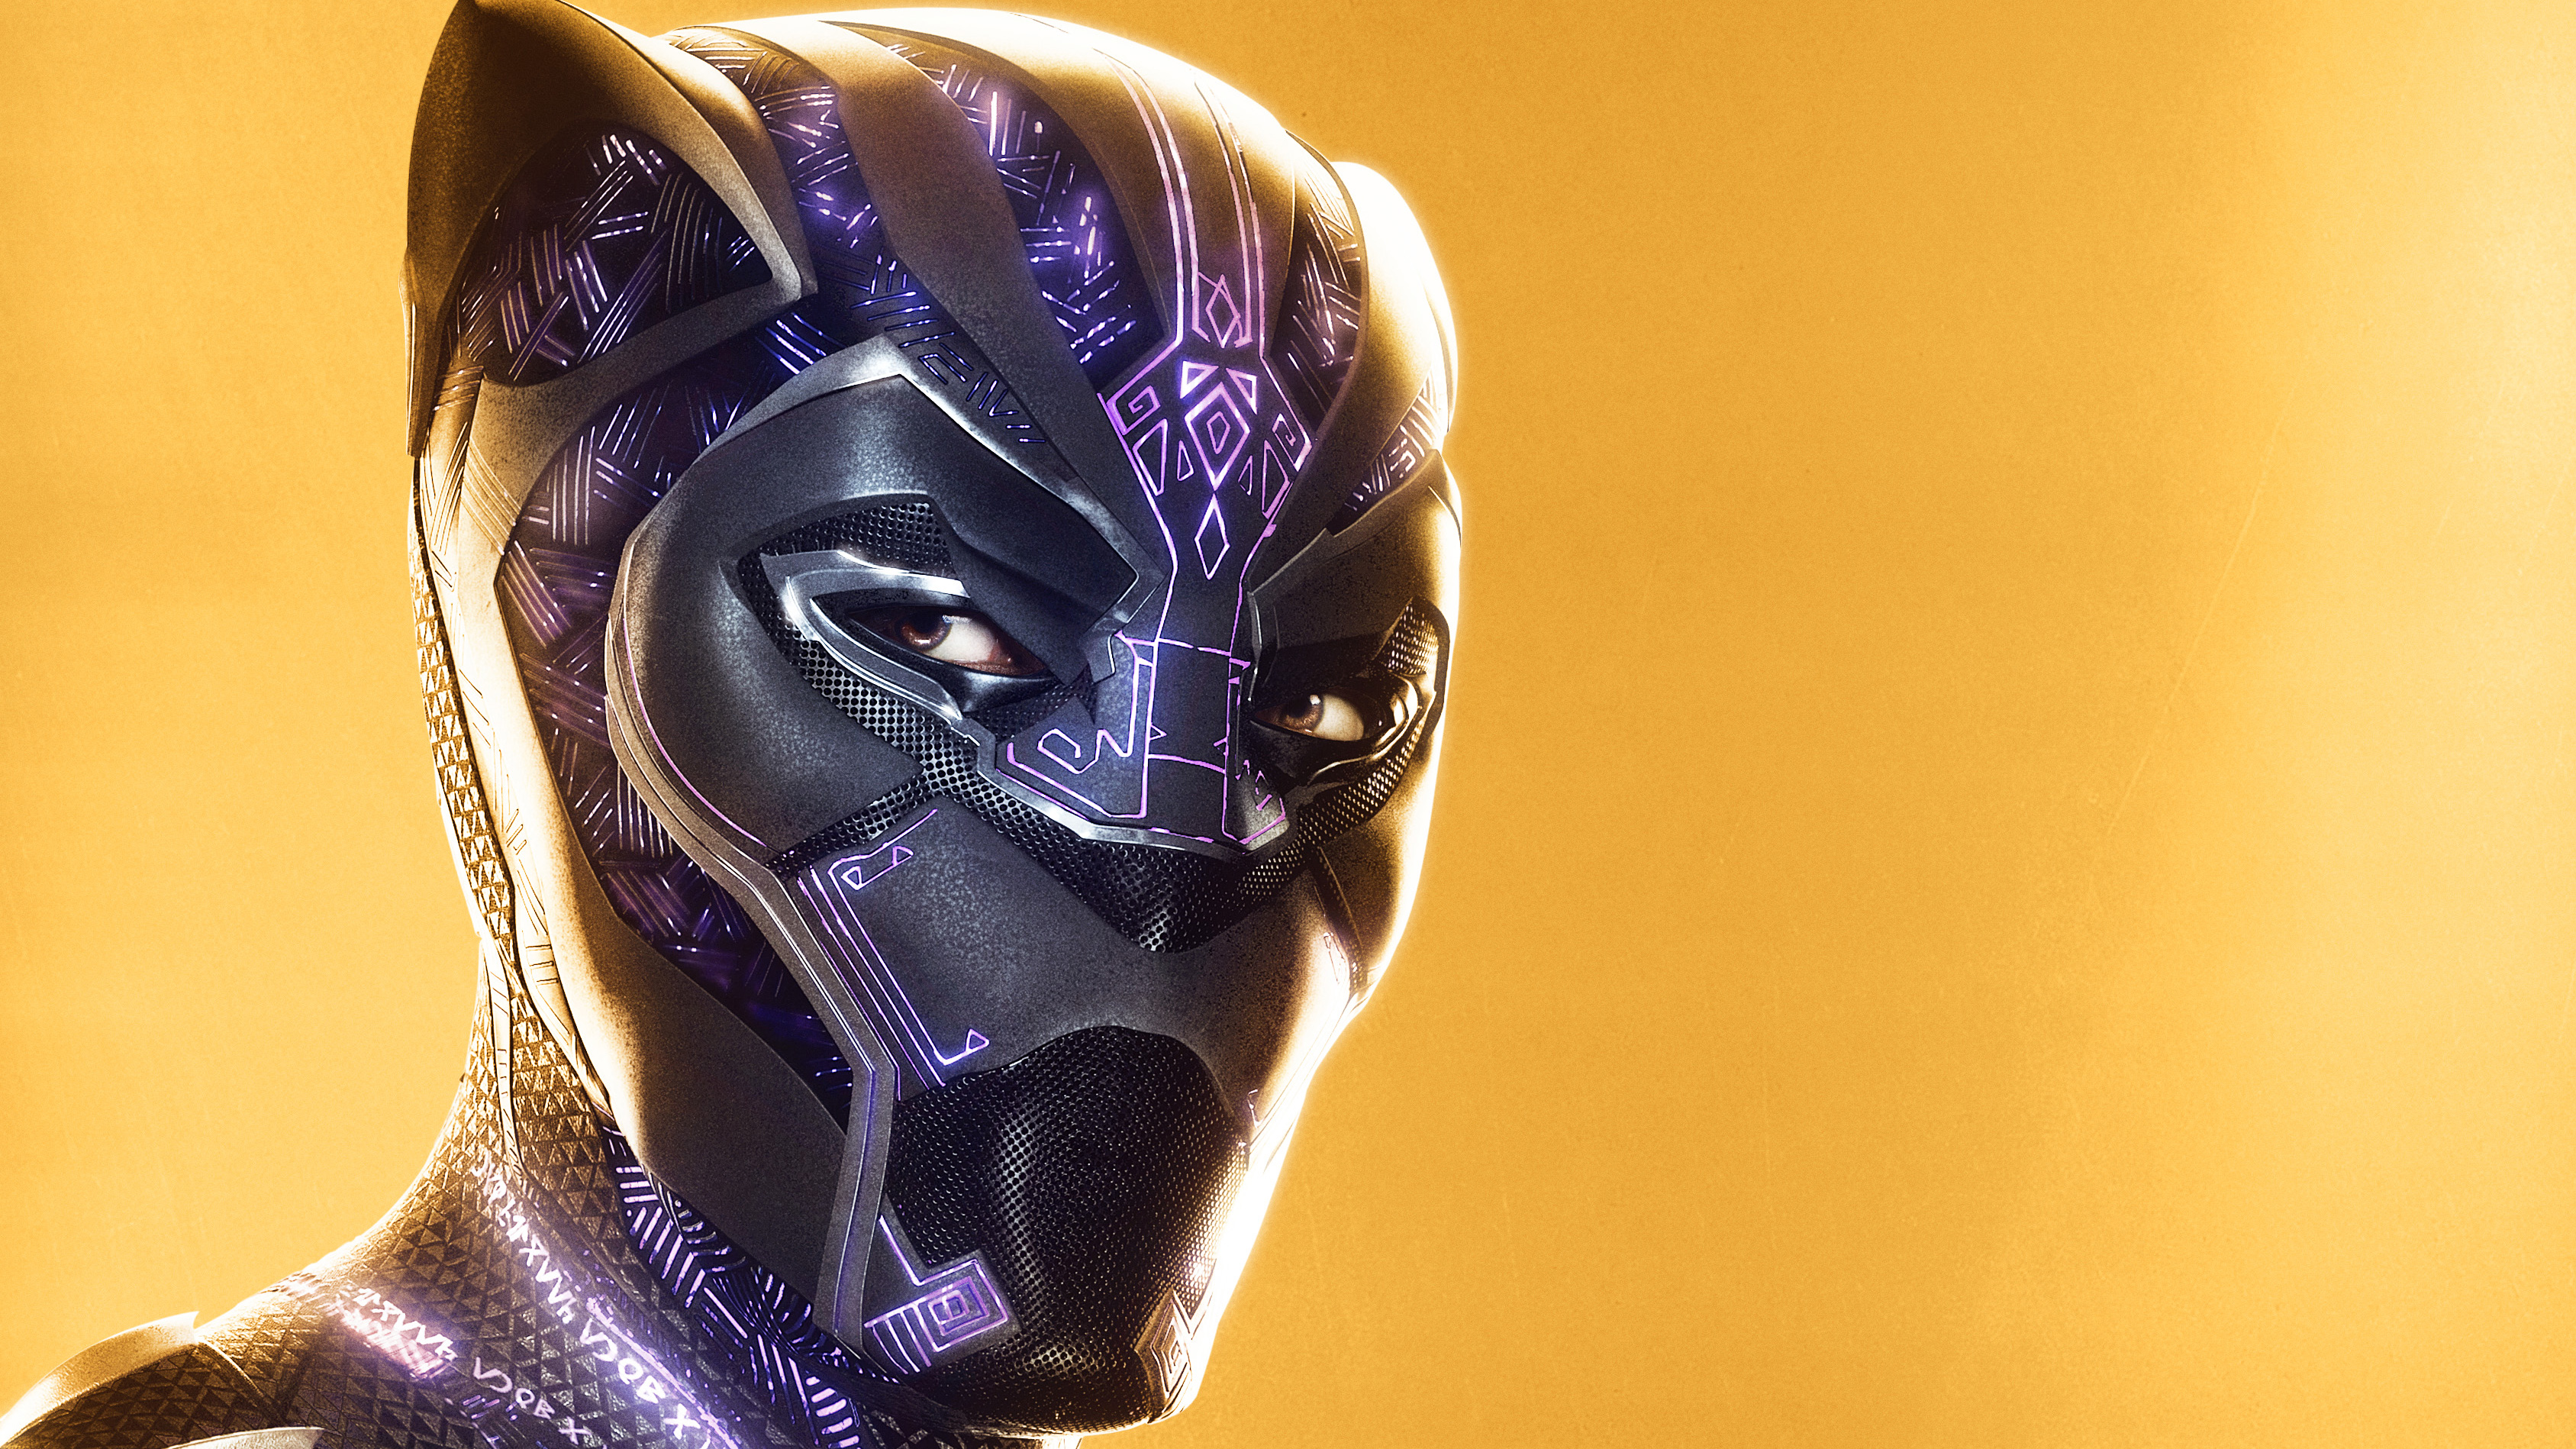 Black Panther Wallpapers | HD Wallpapers